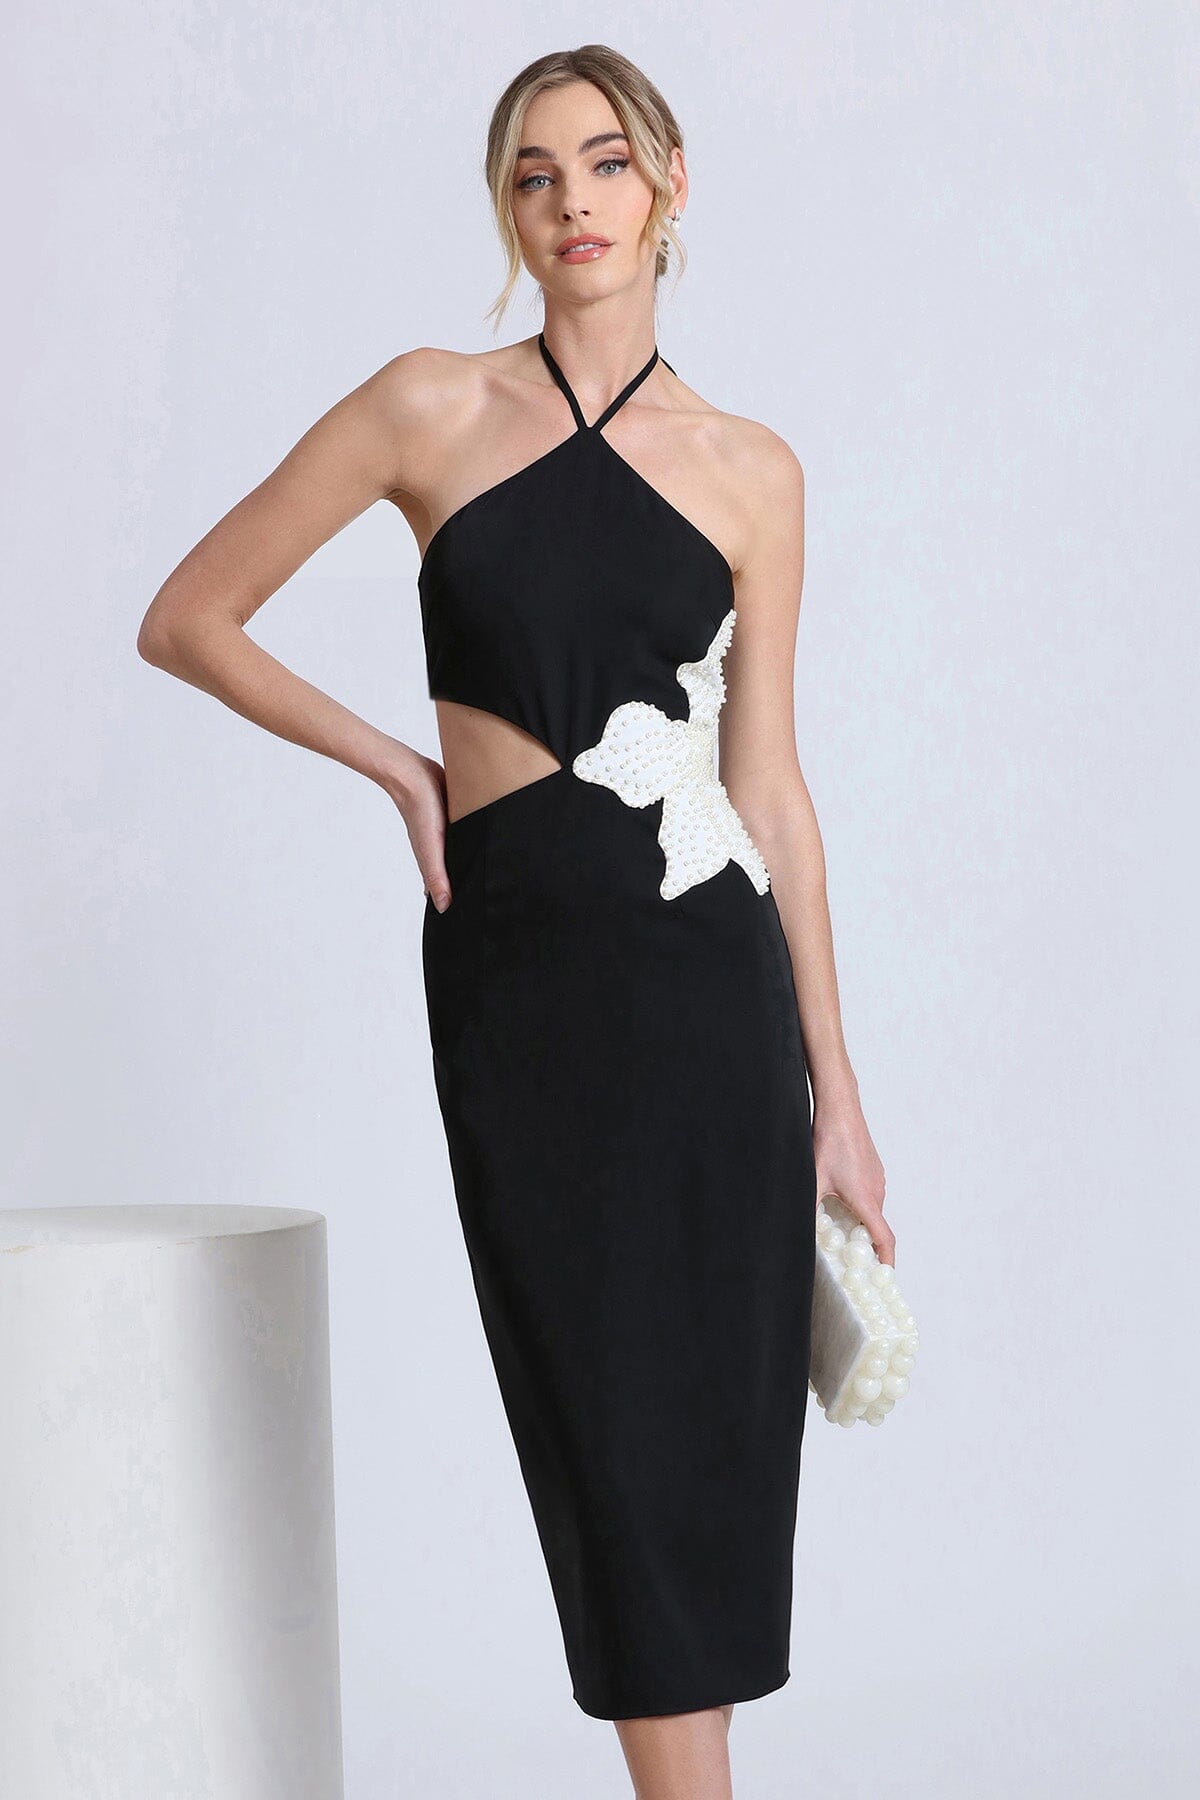 white flower embellished cut-out black halter dress - women's figure flattering sexy date night dresses for 2024 fashion trends by Avec Les Filles